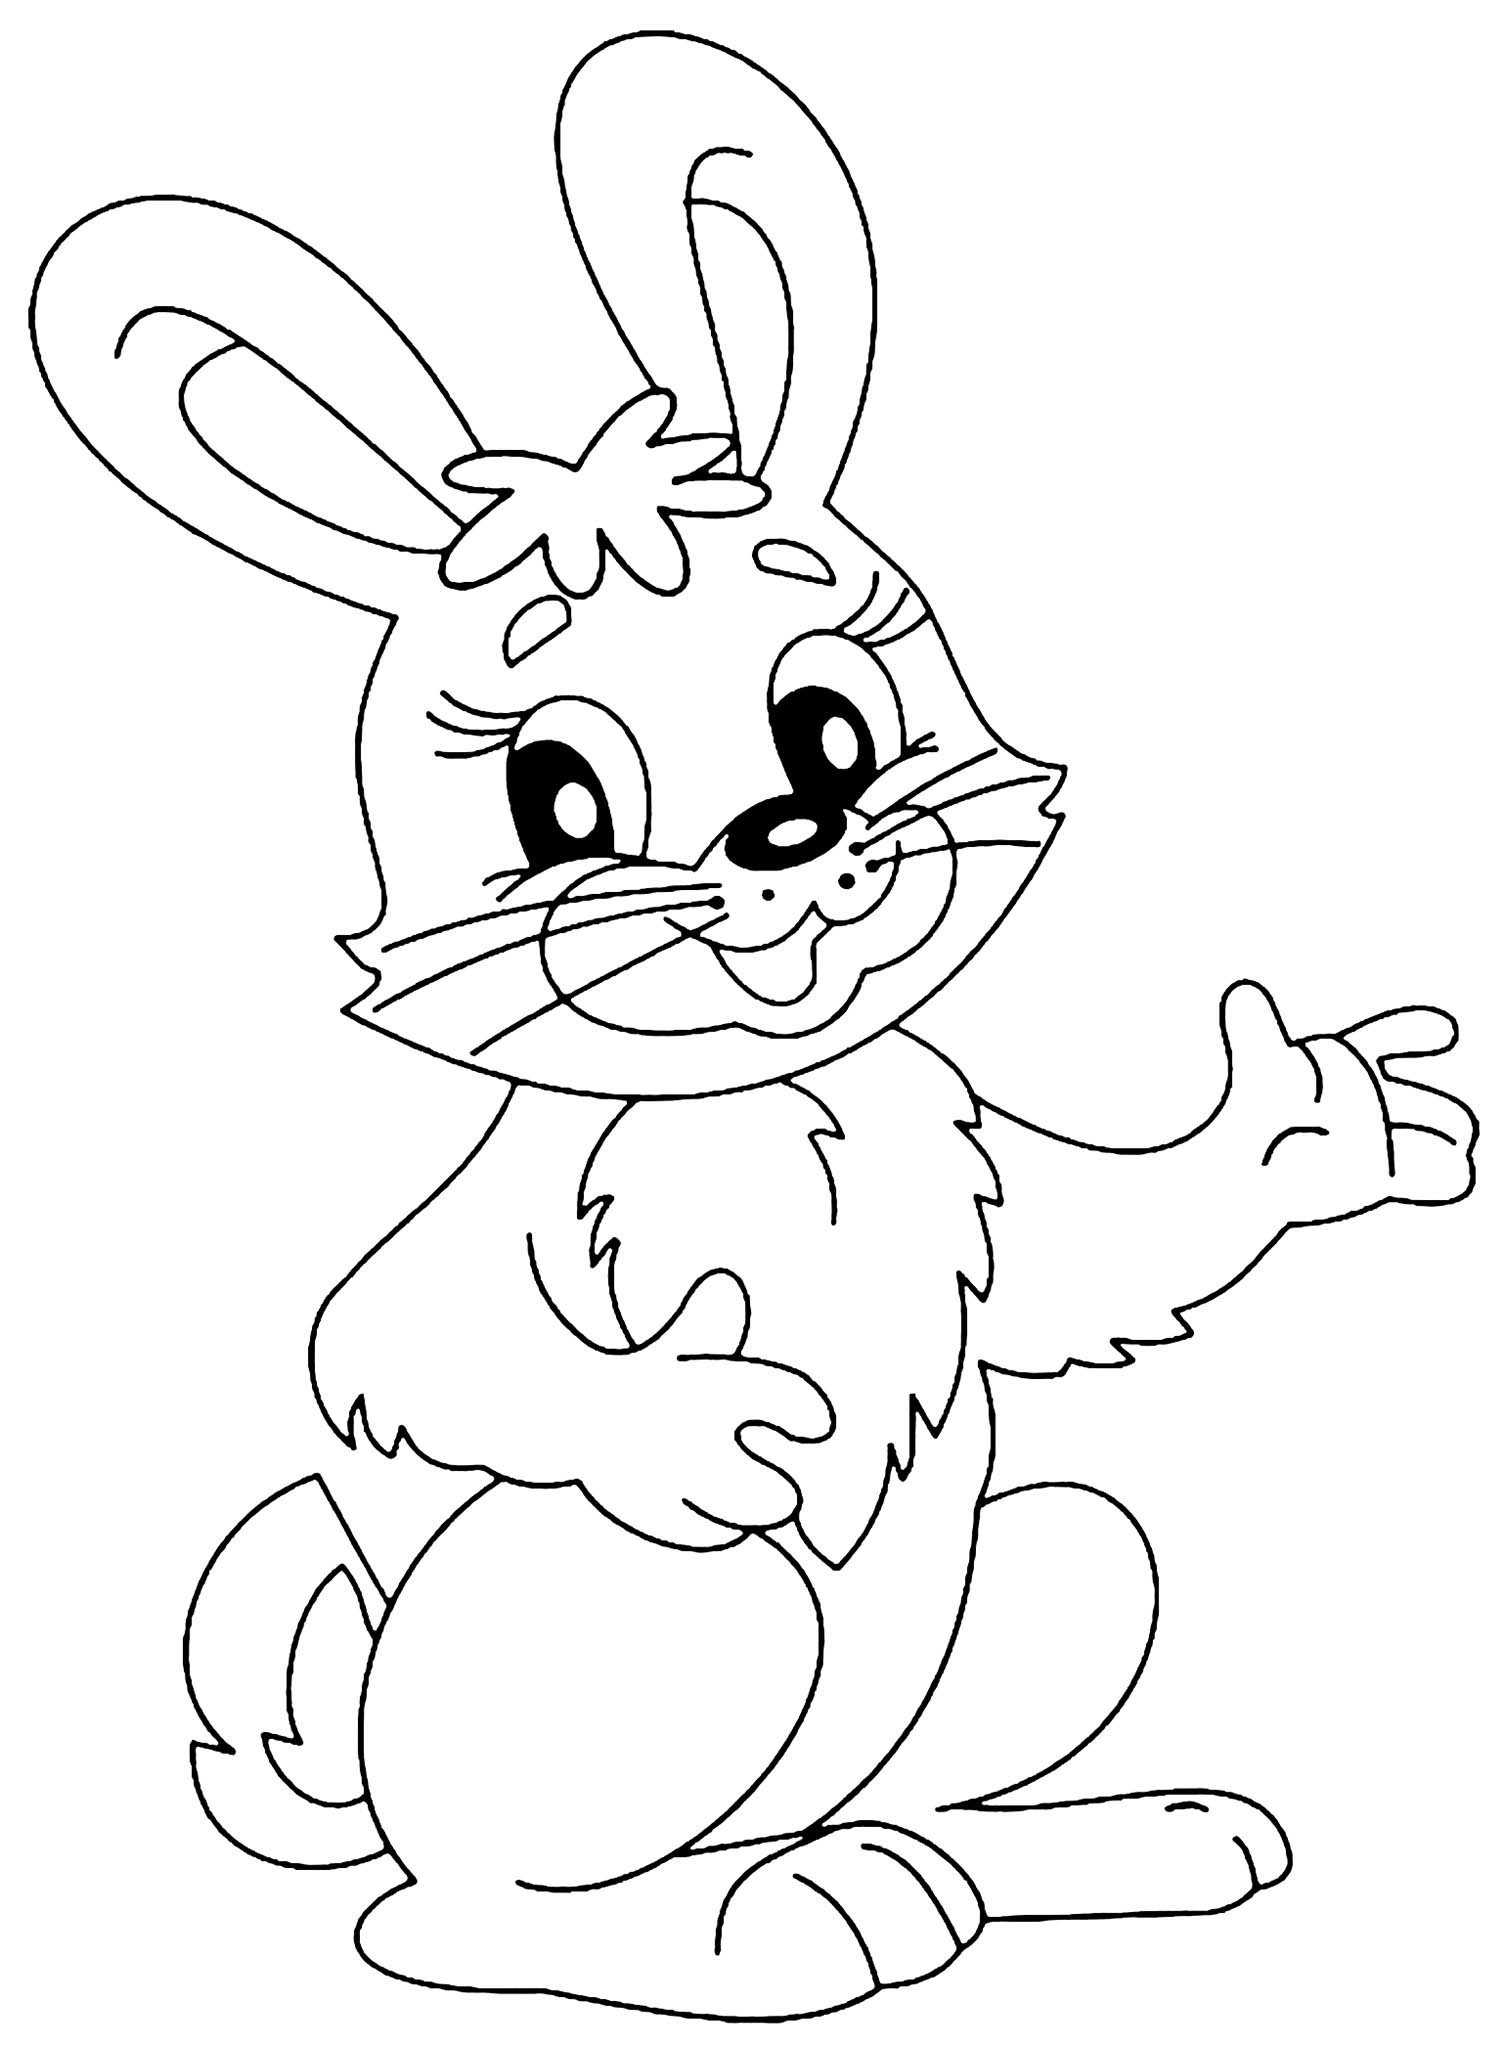 A rabbit colouring page